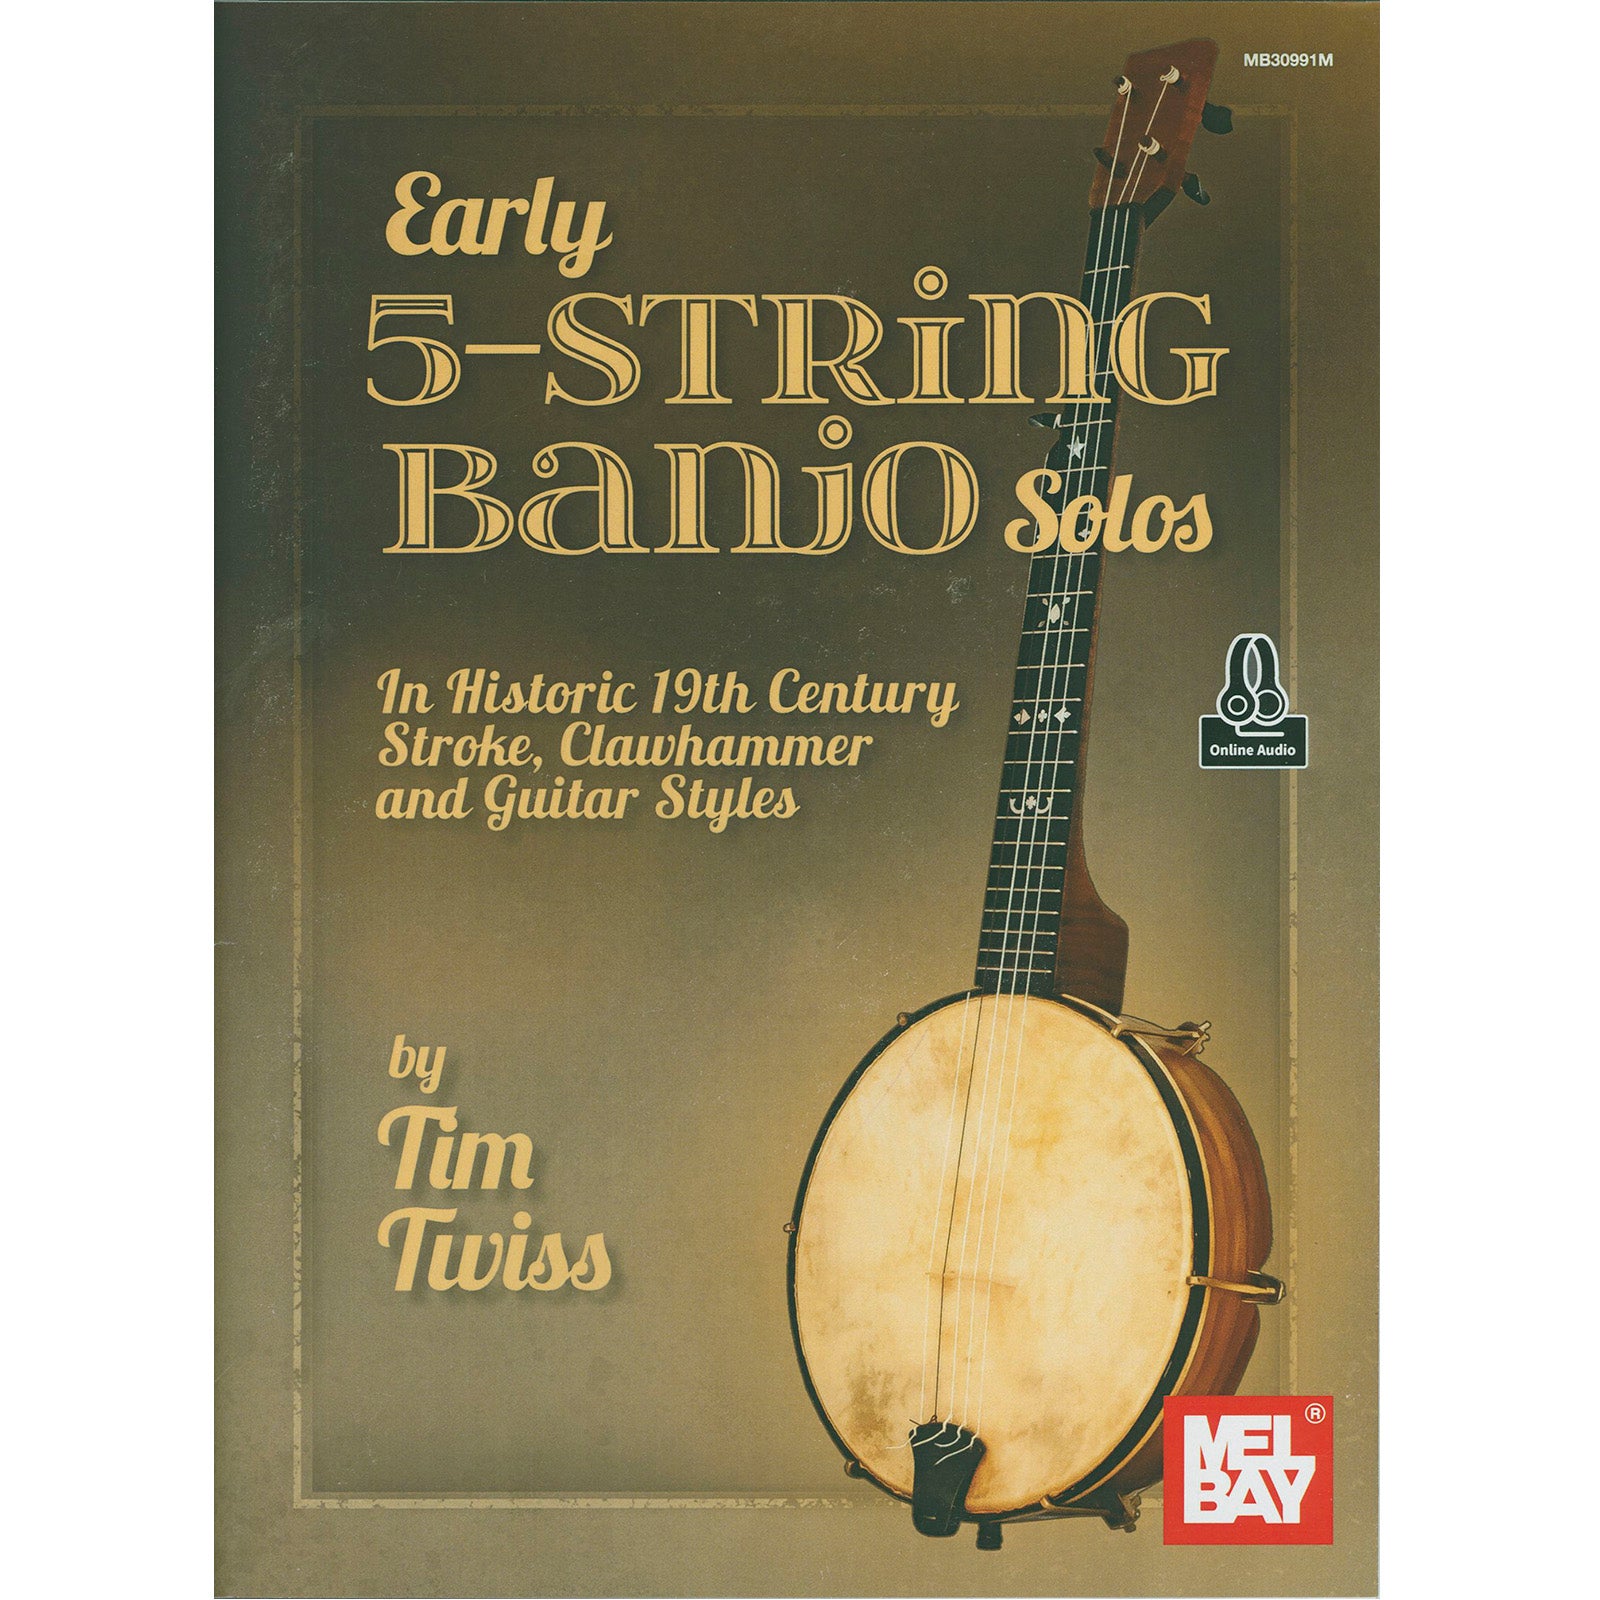 Image 1 of Early 5-String Banjo Solos- SKU# 02-30991M : Product Type Media : Elderly Instruments